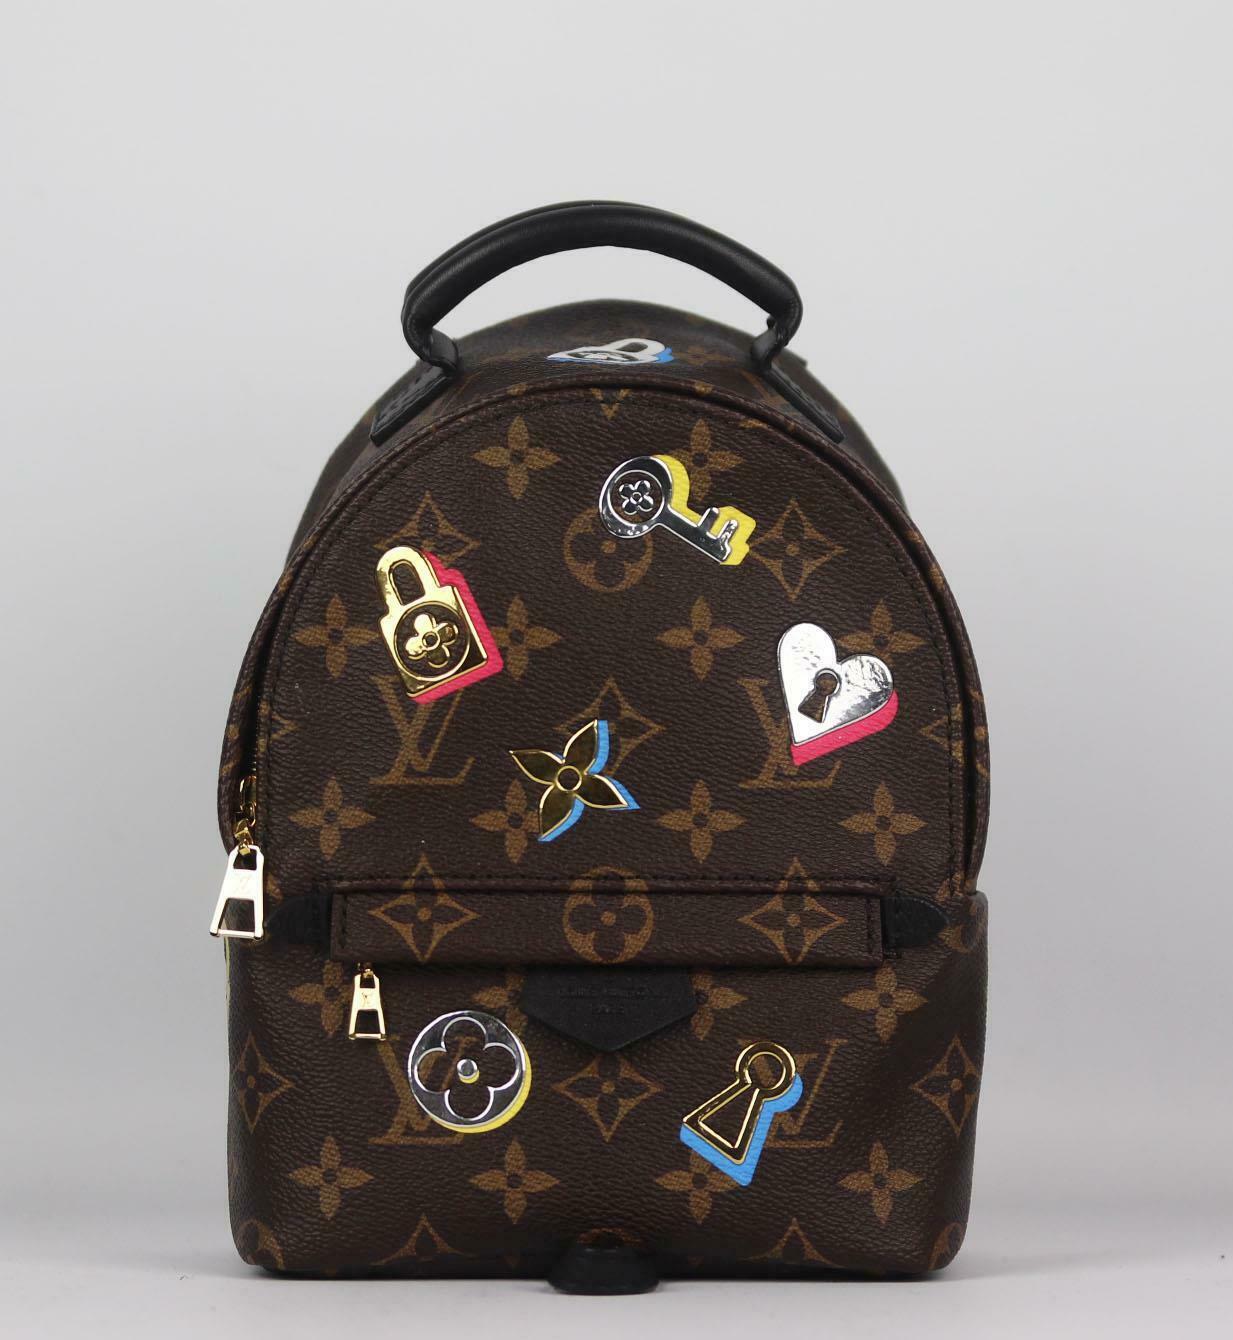 We're obsessed with backpacks right now, and the 'Love Lock Palm Springs' bag from Louis Vuitton is at the top of our wish list, the style features a bold Monogram print on coated canvas and multicoloured lock, key and flower motifs, it features a